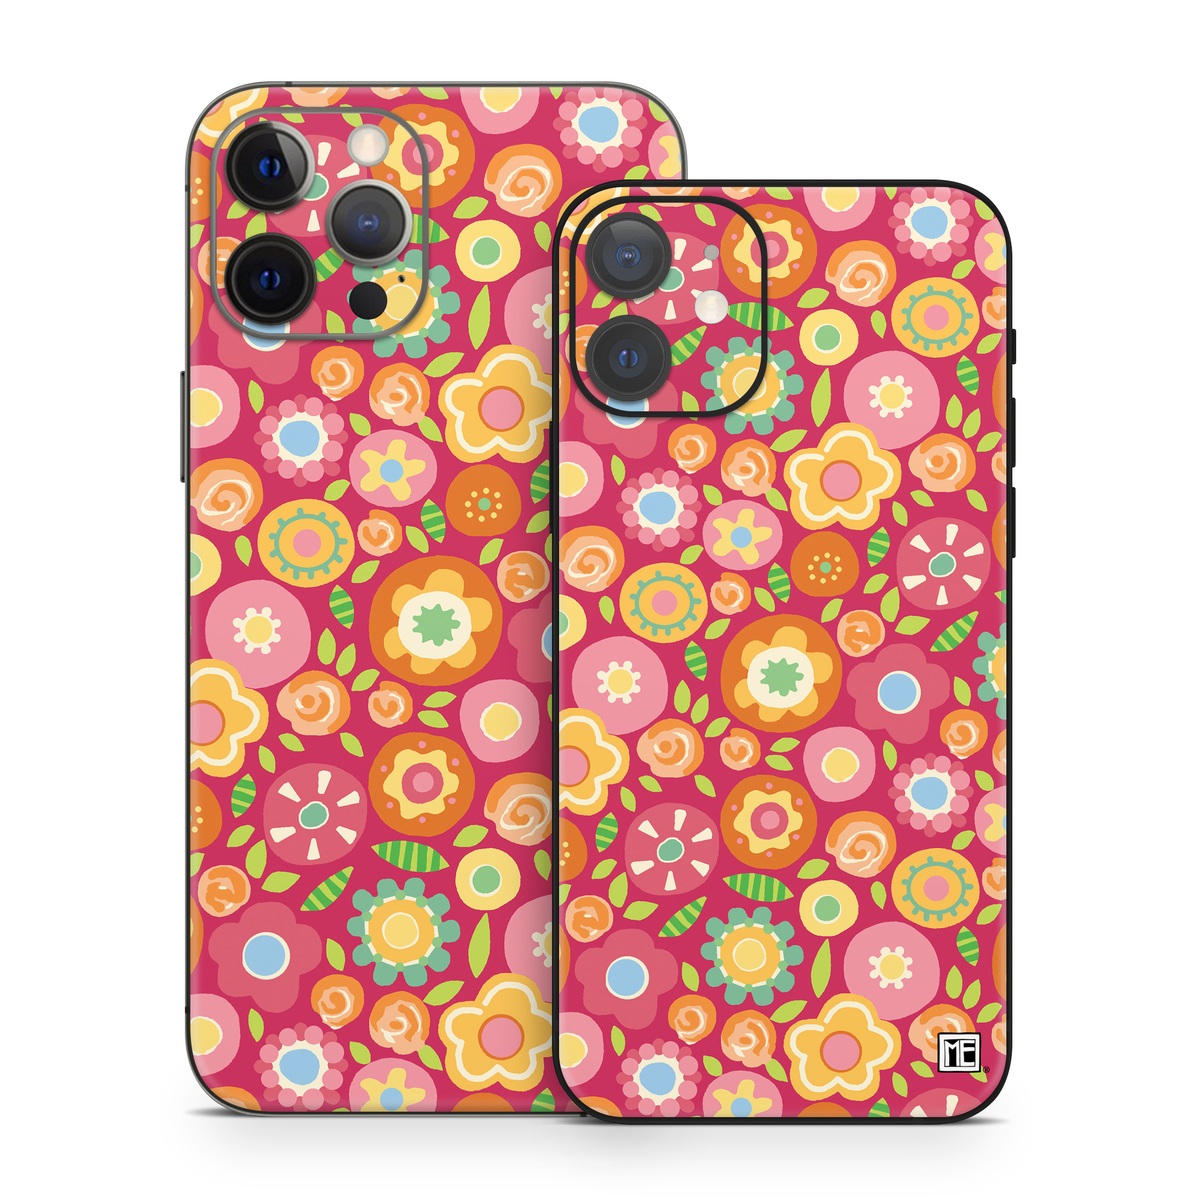 Apple iPhone 12 Skin - Flowers Squished (Image 1)